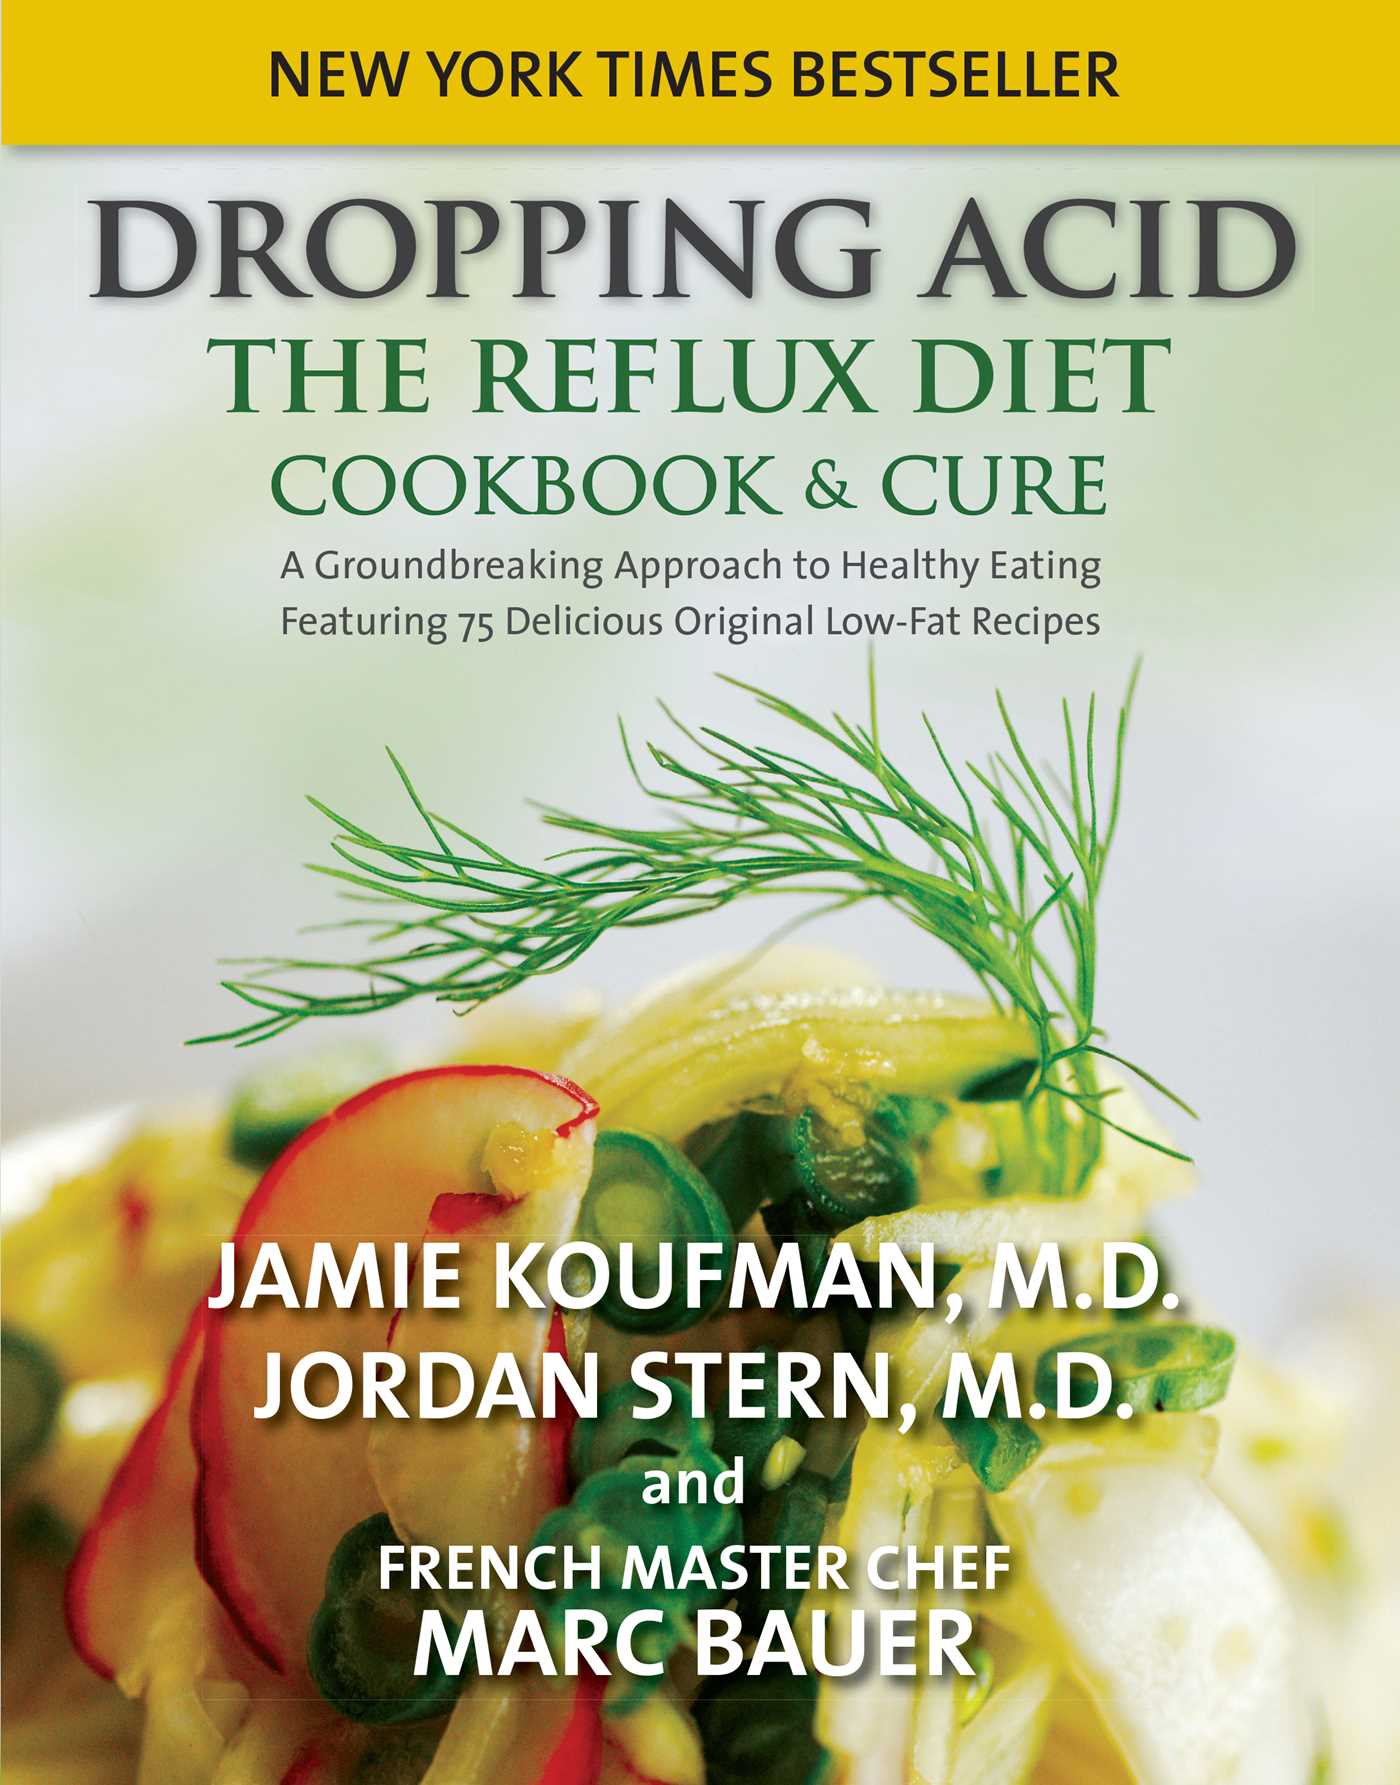 Dropping Acid : The Reflux Diet Cookbook & Cure (Hardcover) - image 1 of 1